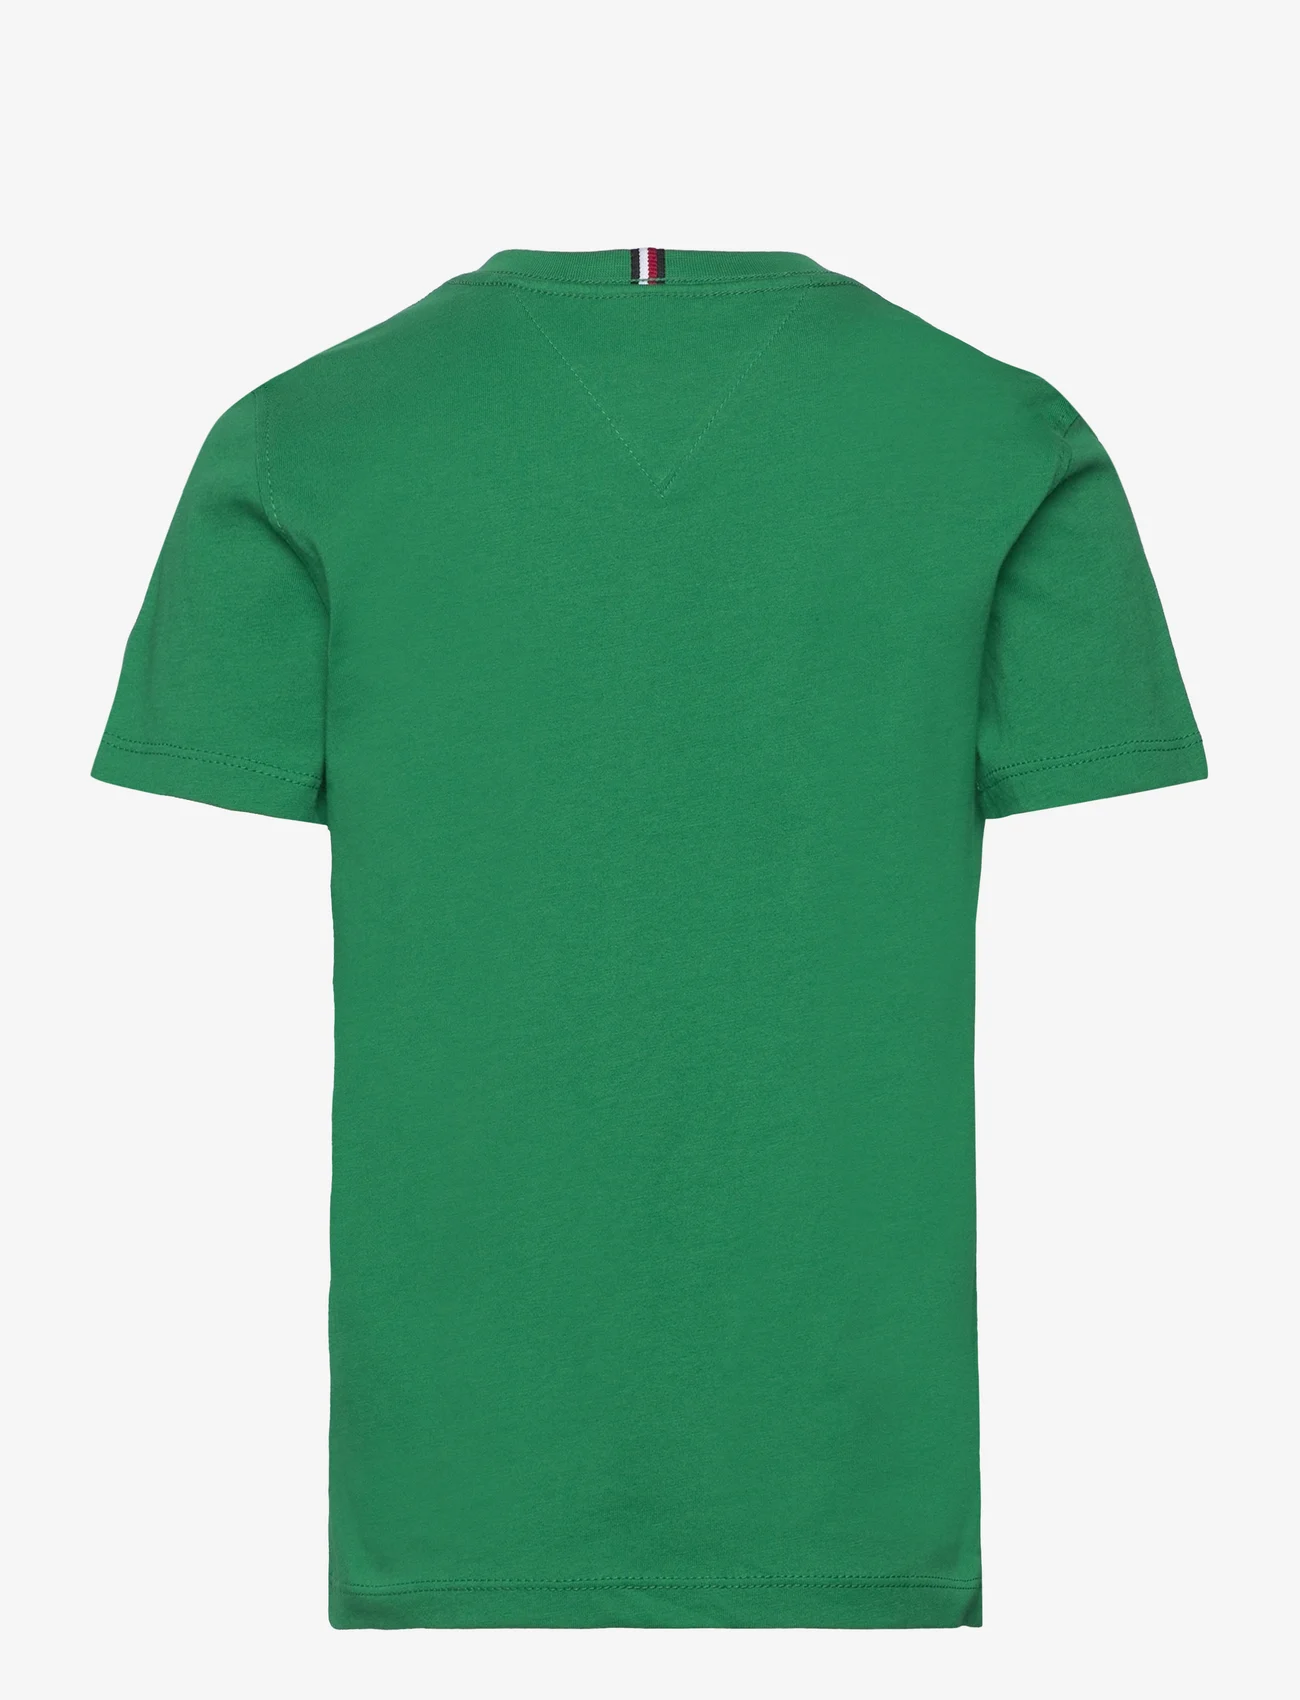 Tommy Hilfiger - ESSENTIAL COTTON TEE SS - korte mouwen - olympic green - 1